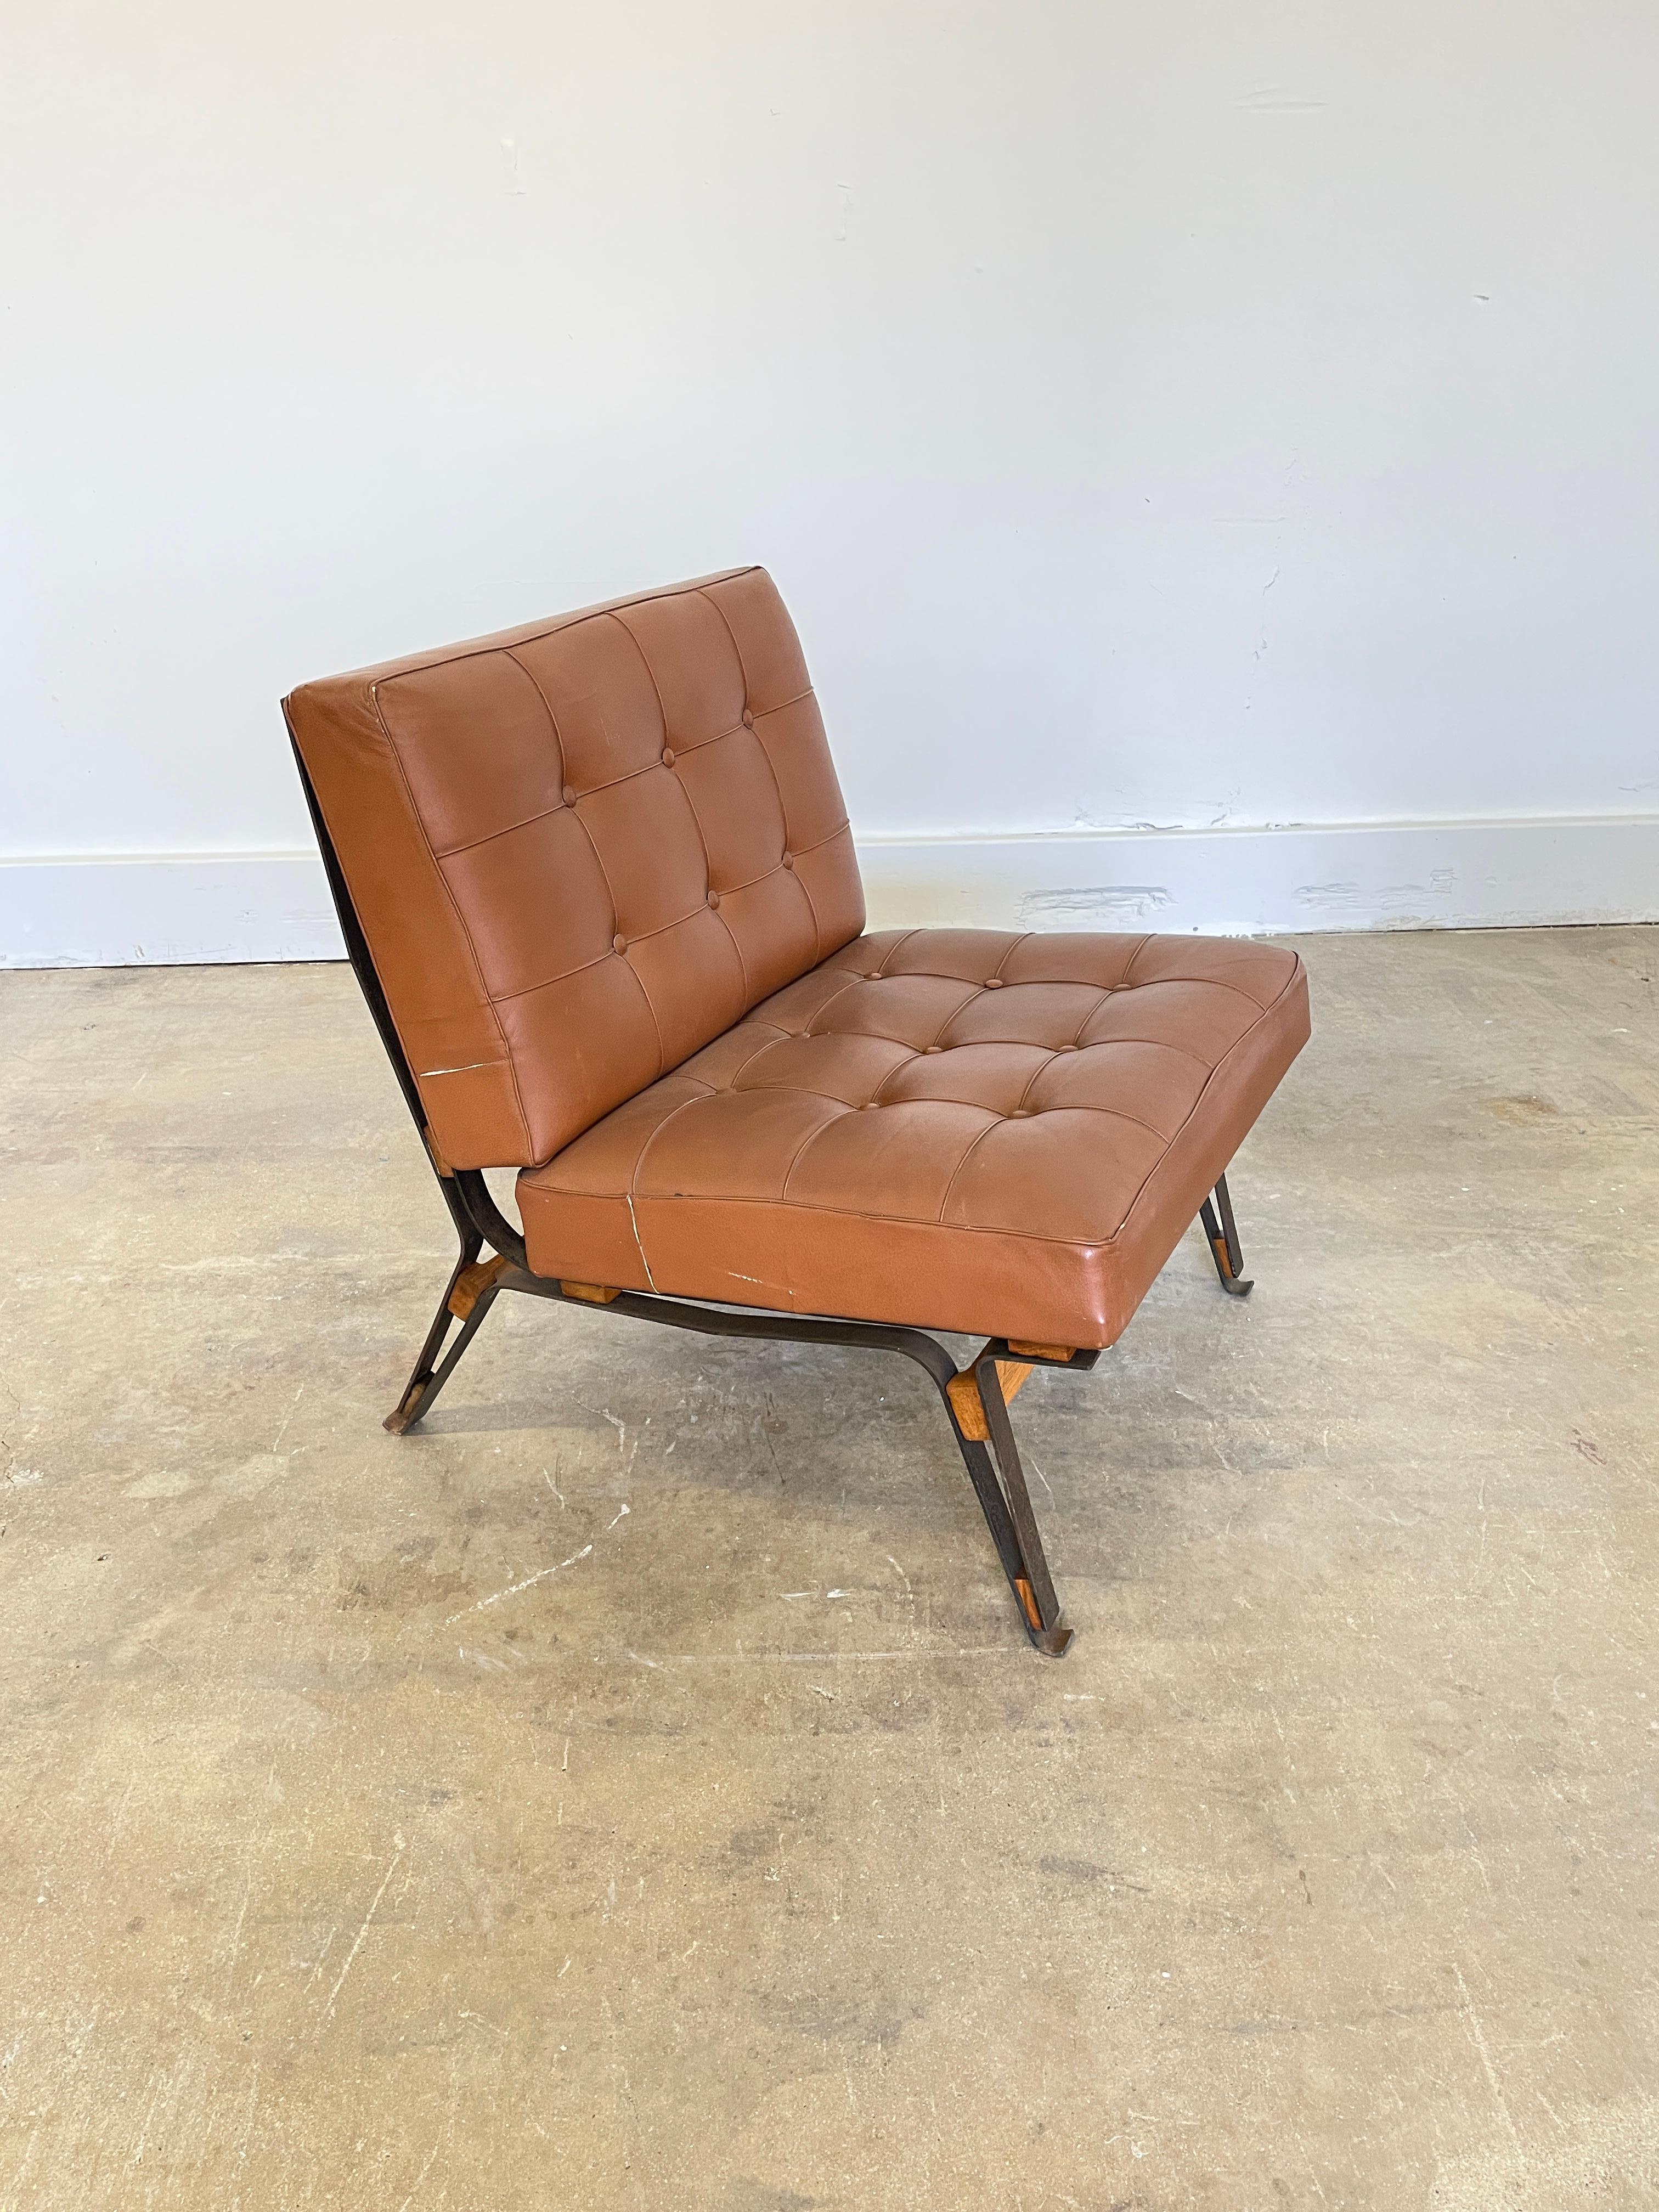 Model 856 Rare Pair of Matched Leather Lounge Chairs by Ico Parisi, 1950s For Sale 1